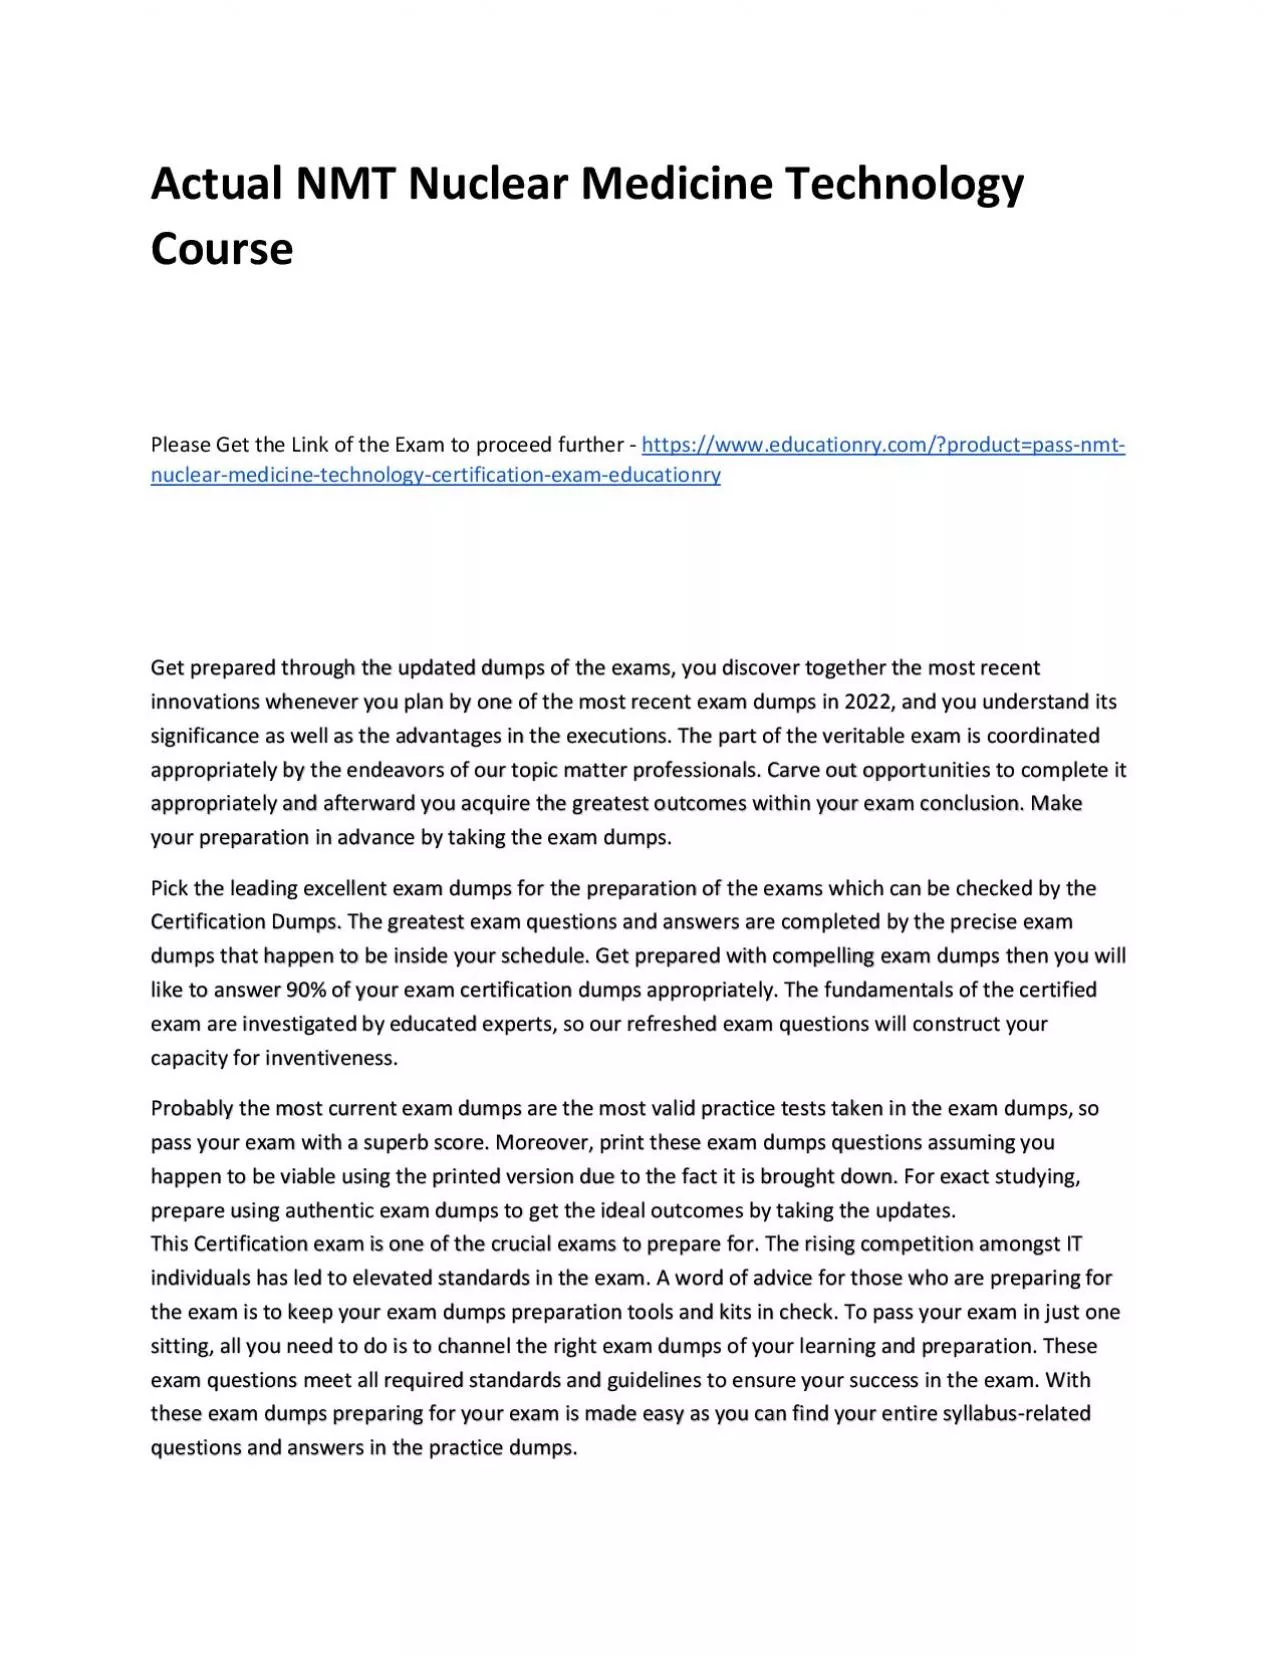 Actual NMT Nuclear Medicine Technology Practice Course